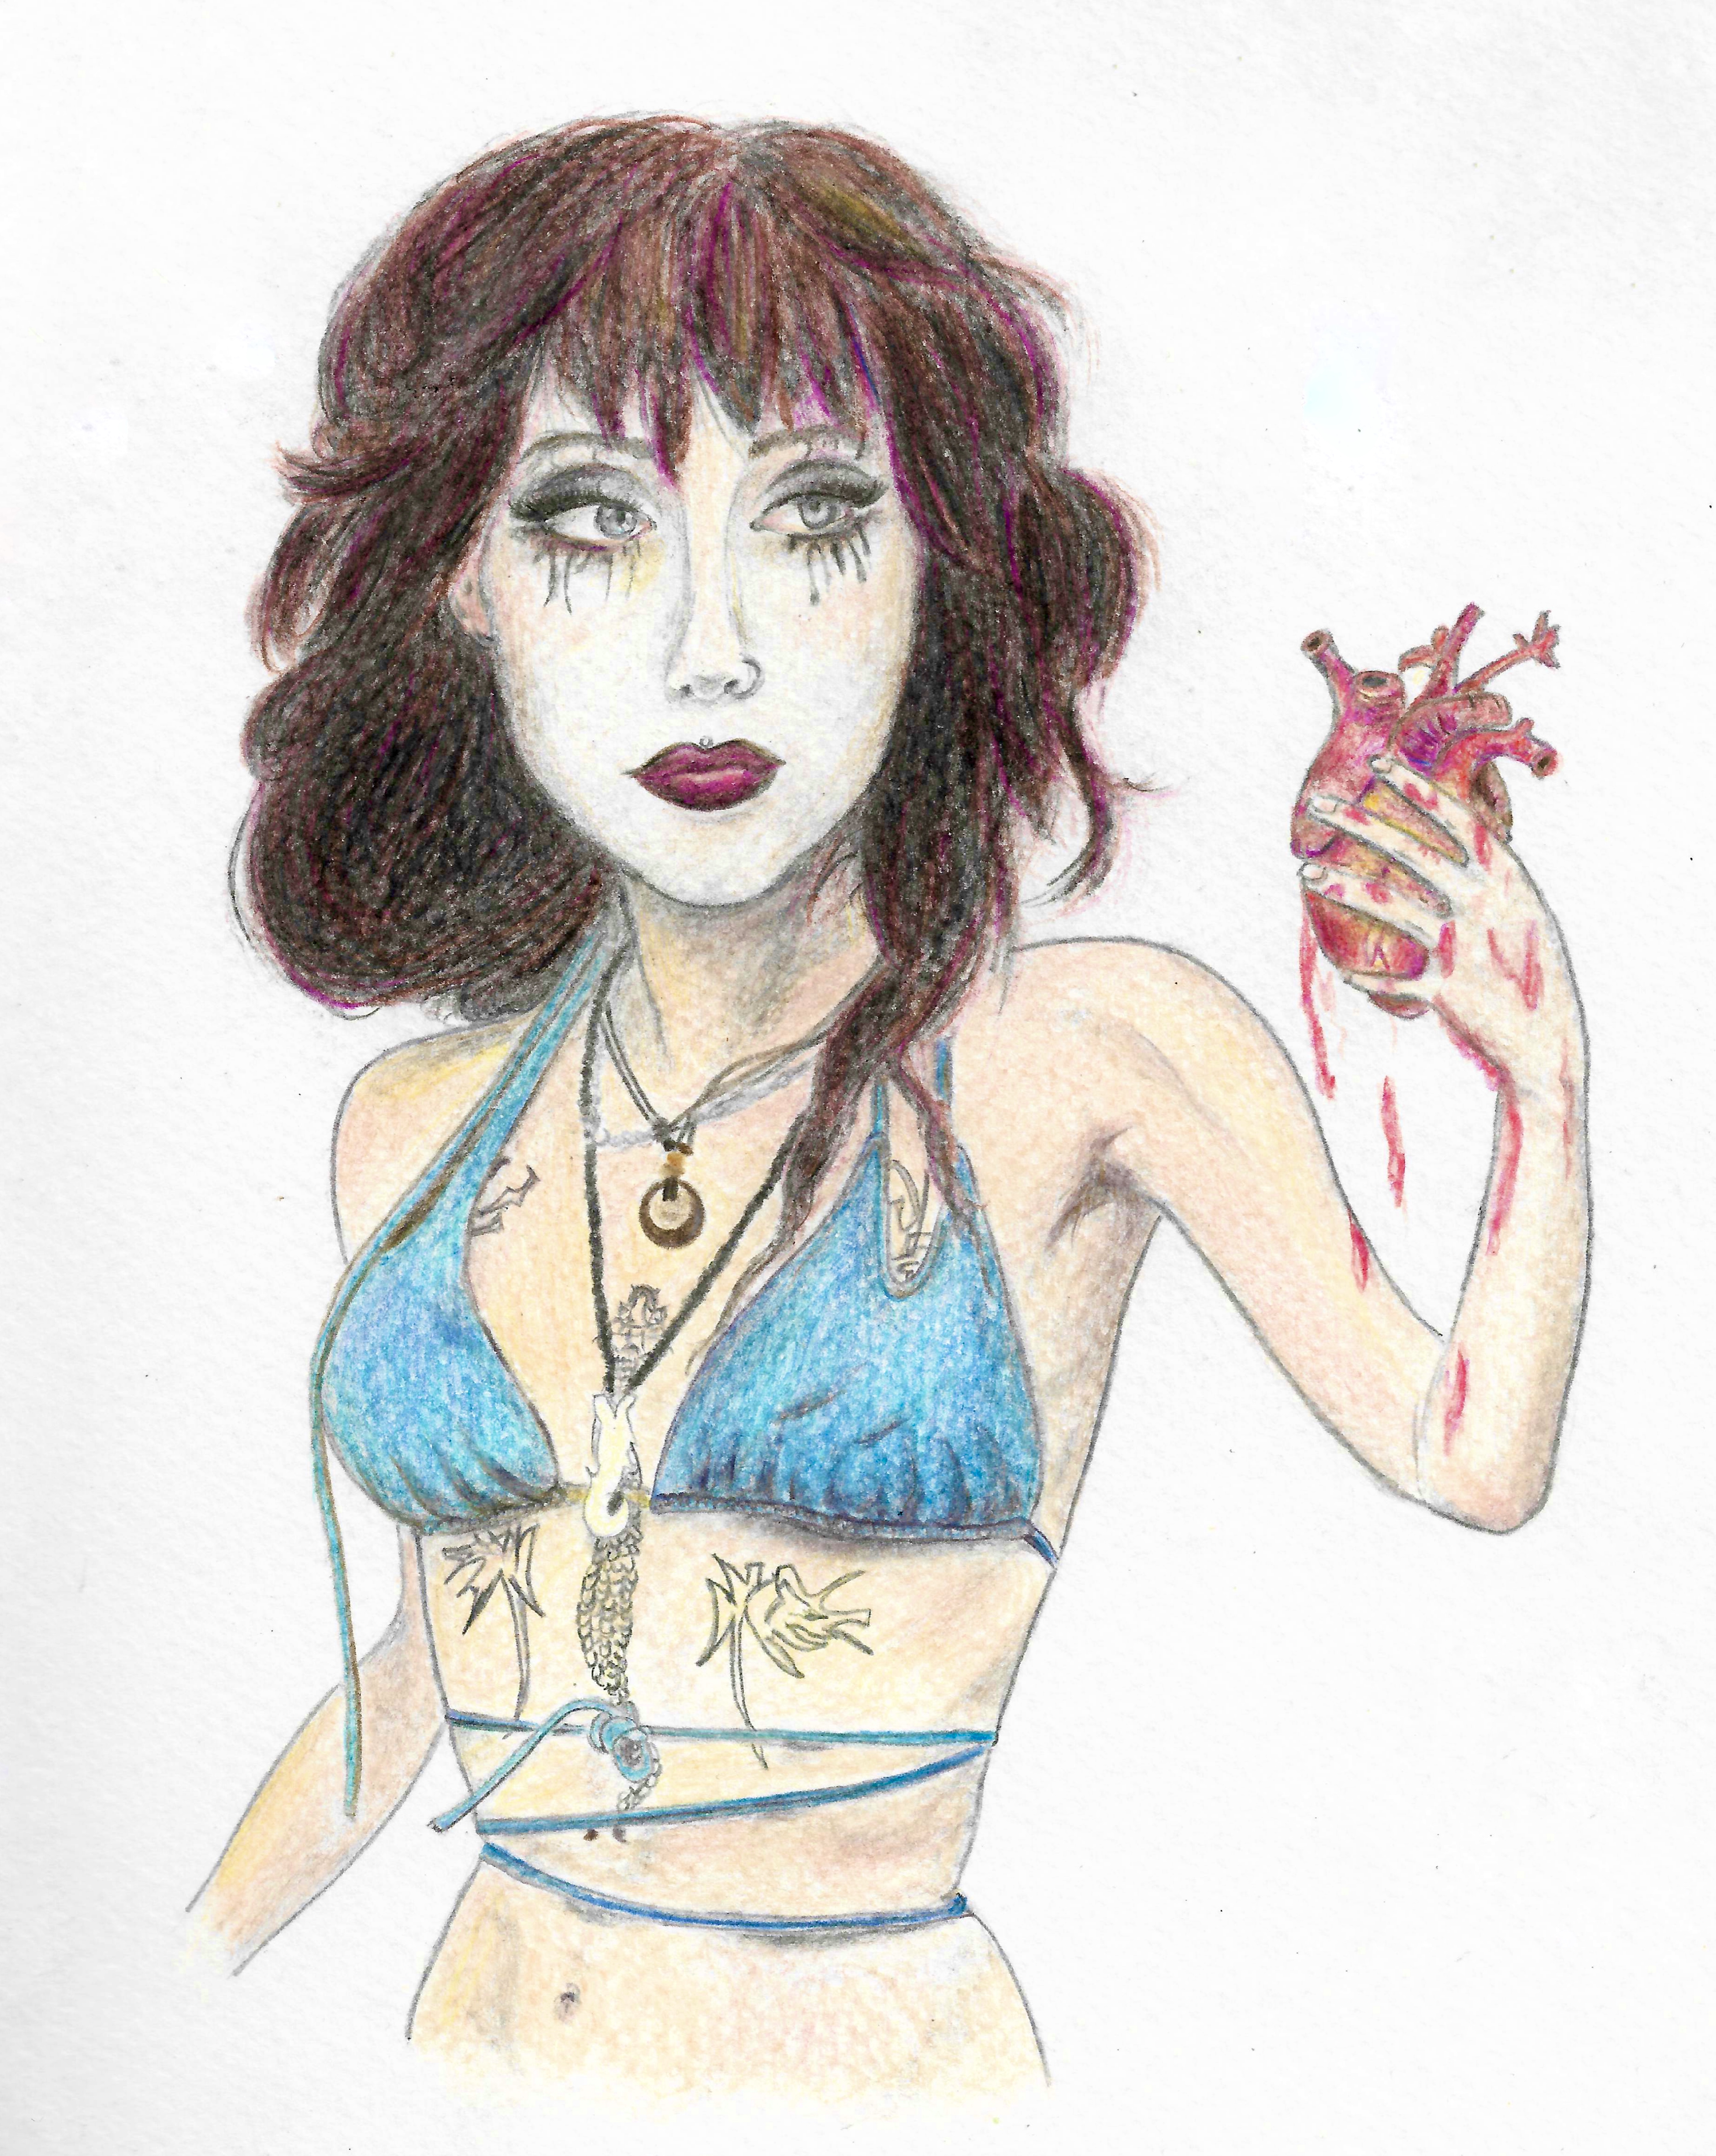 colour pencil drawing of my friend Epi holding a bleeding heart